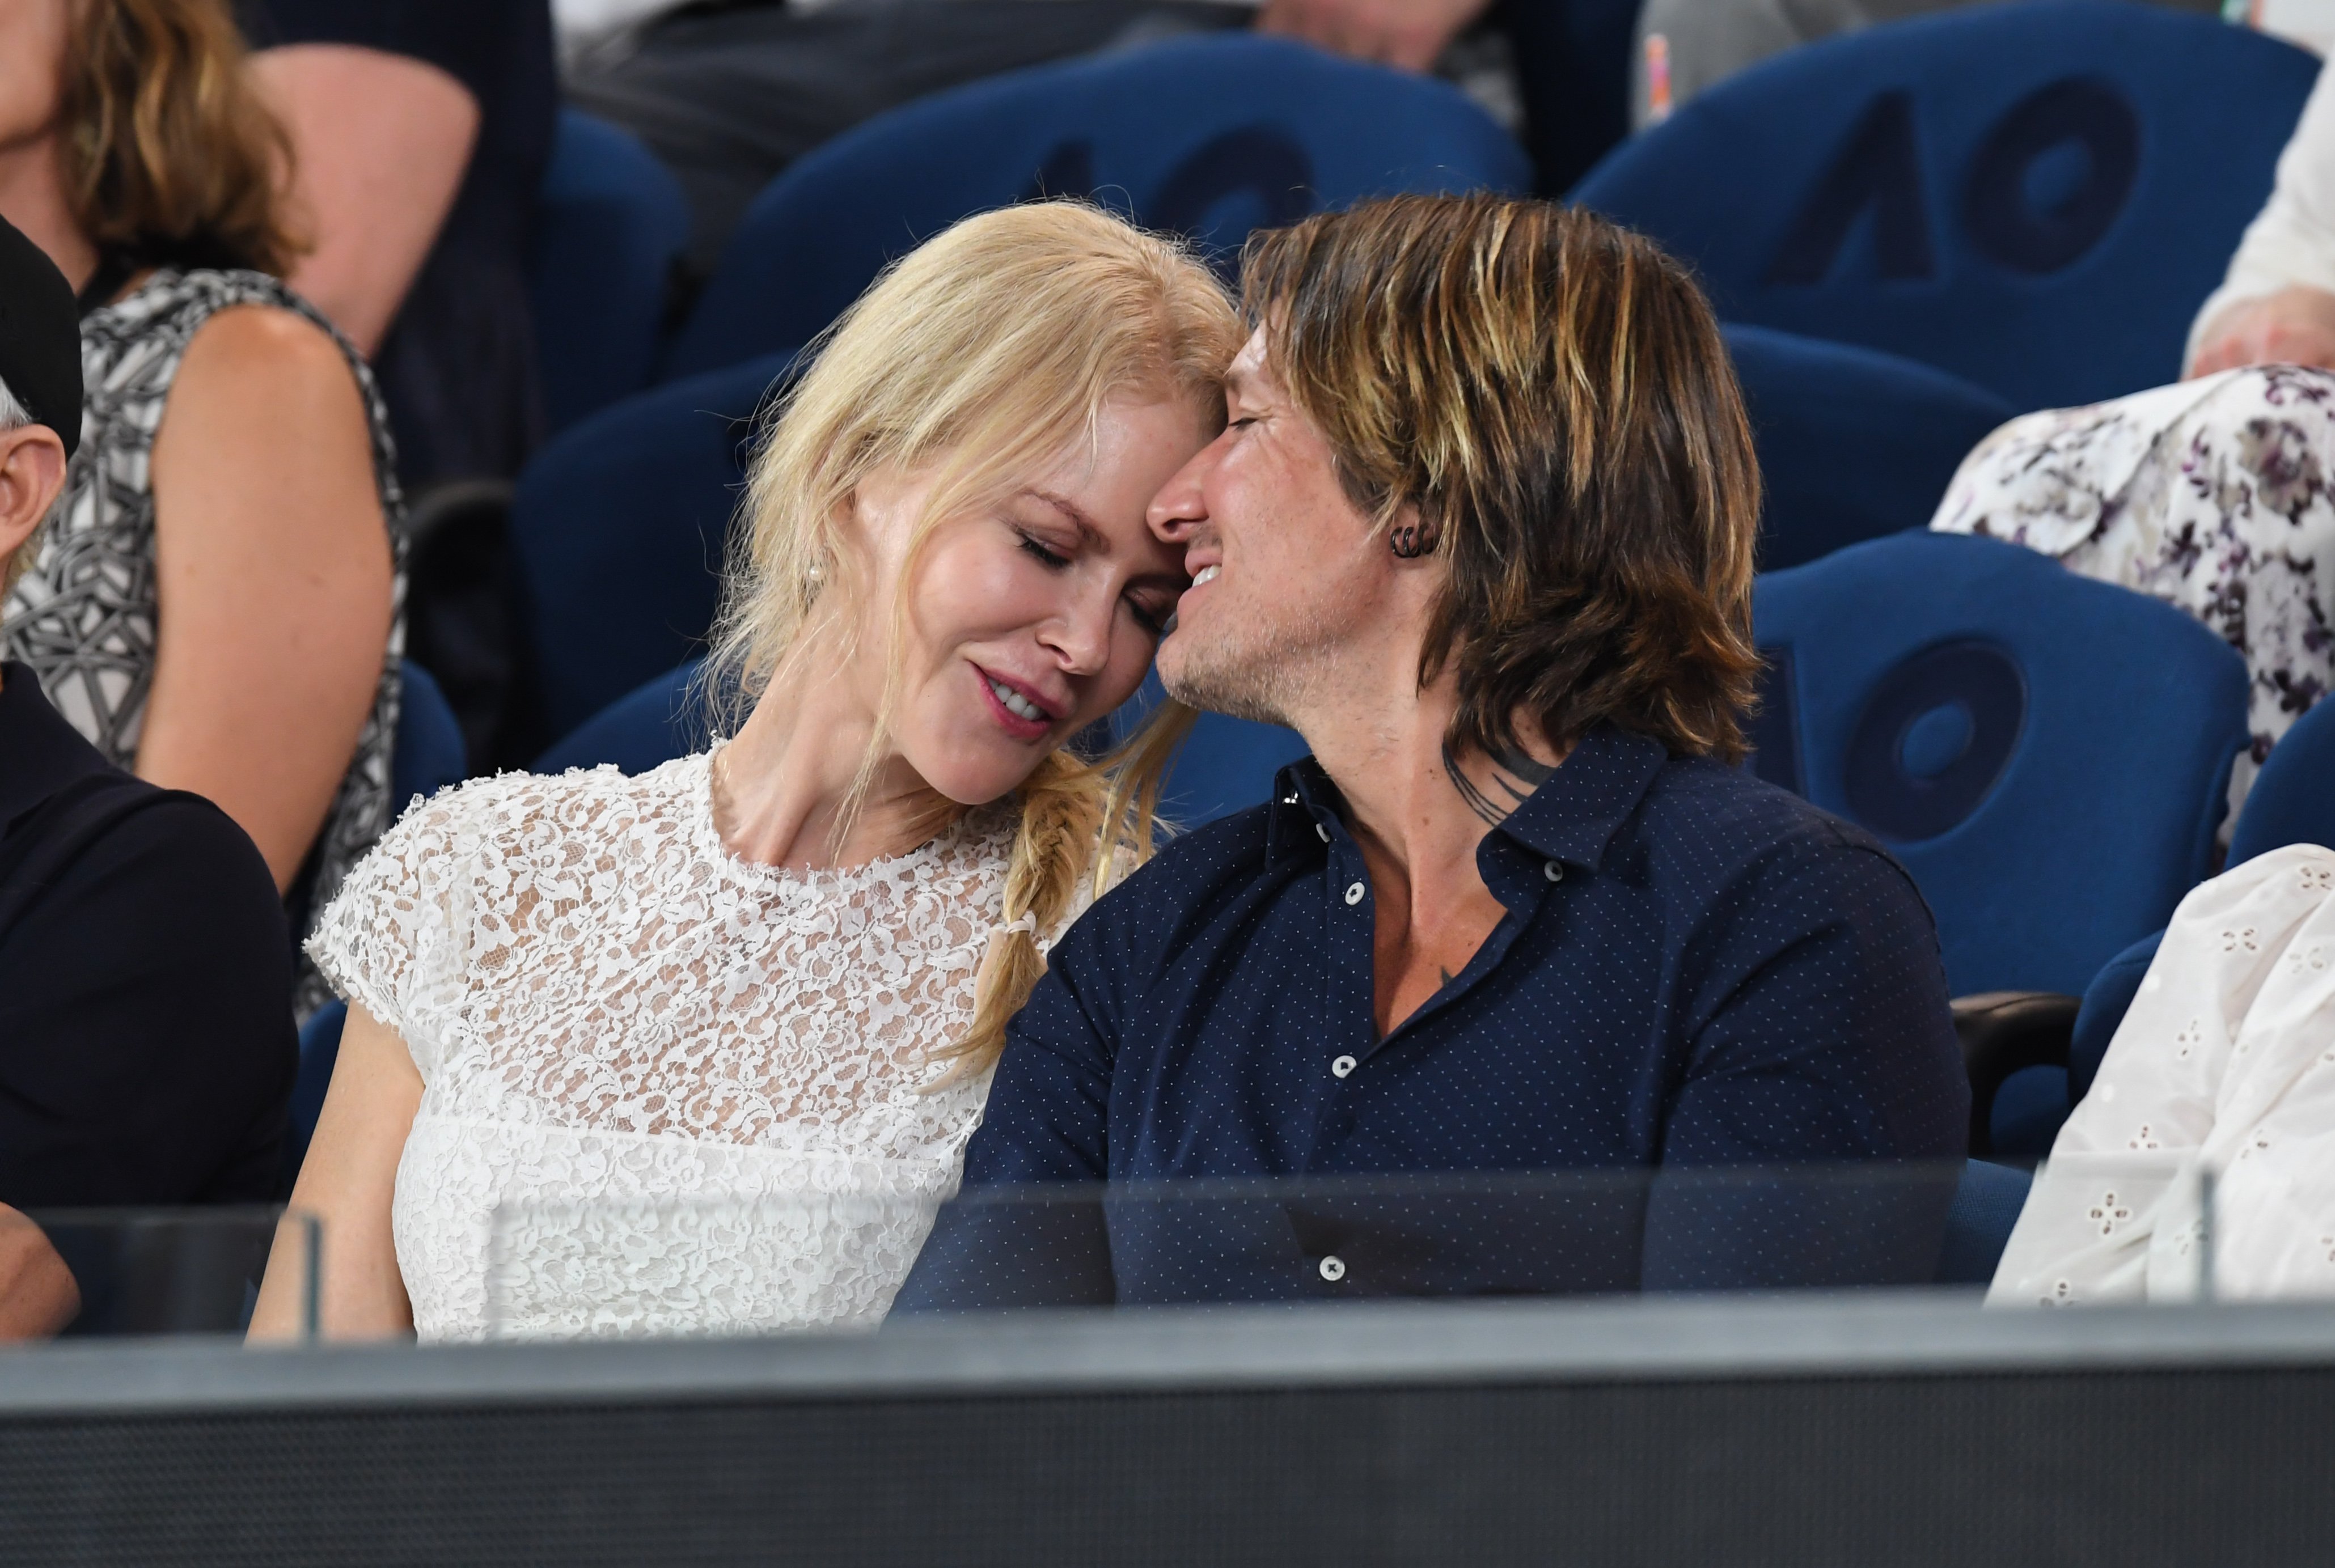 Nicole Kidman and Keith Urban during the 2019 Australian Open at Melbourne Park on January 24, 2019 in Melbourne, Australia. / Source: Getty Images